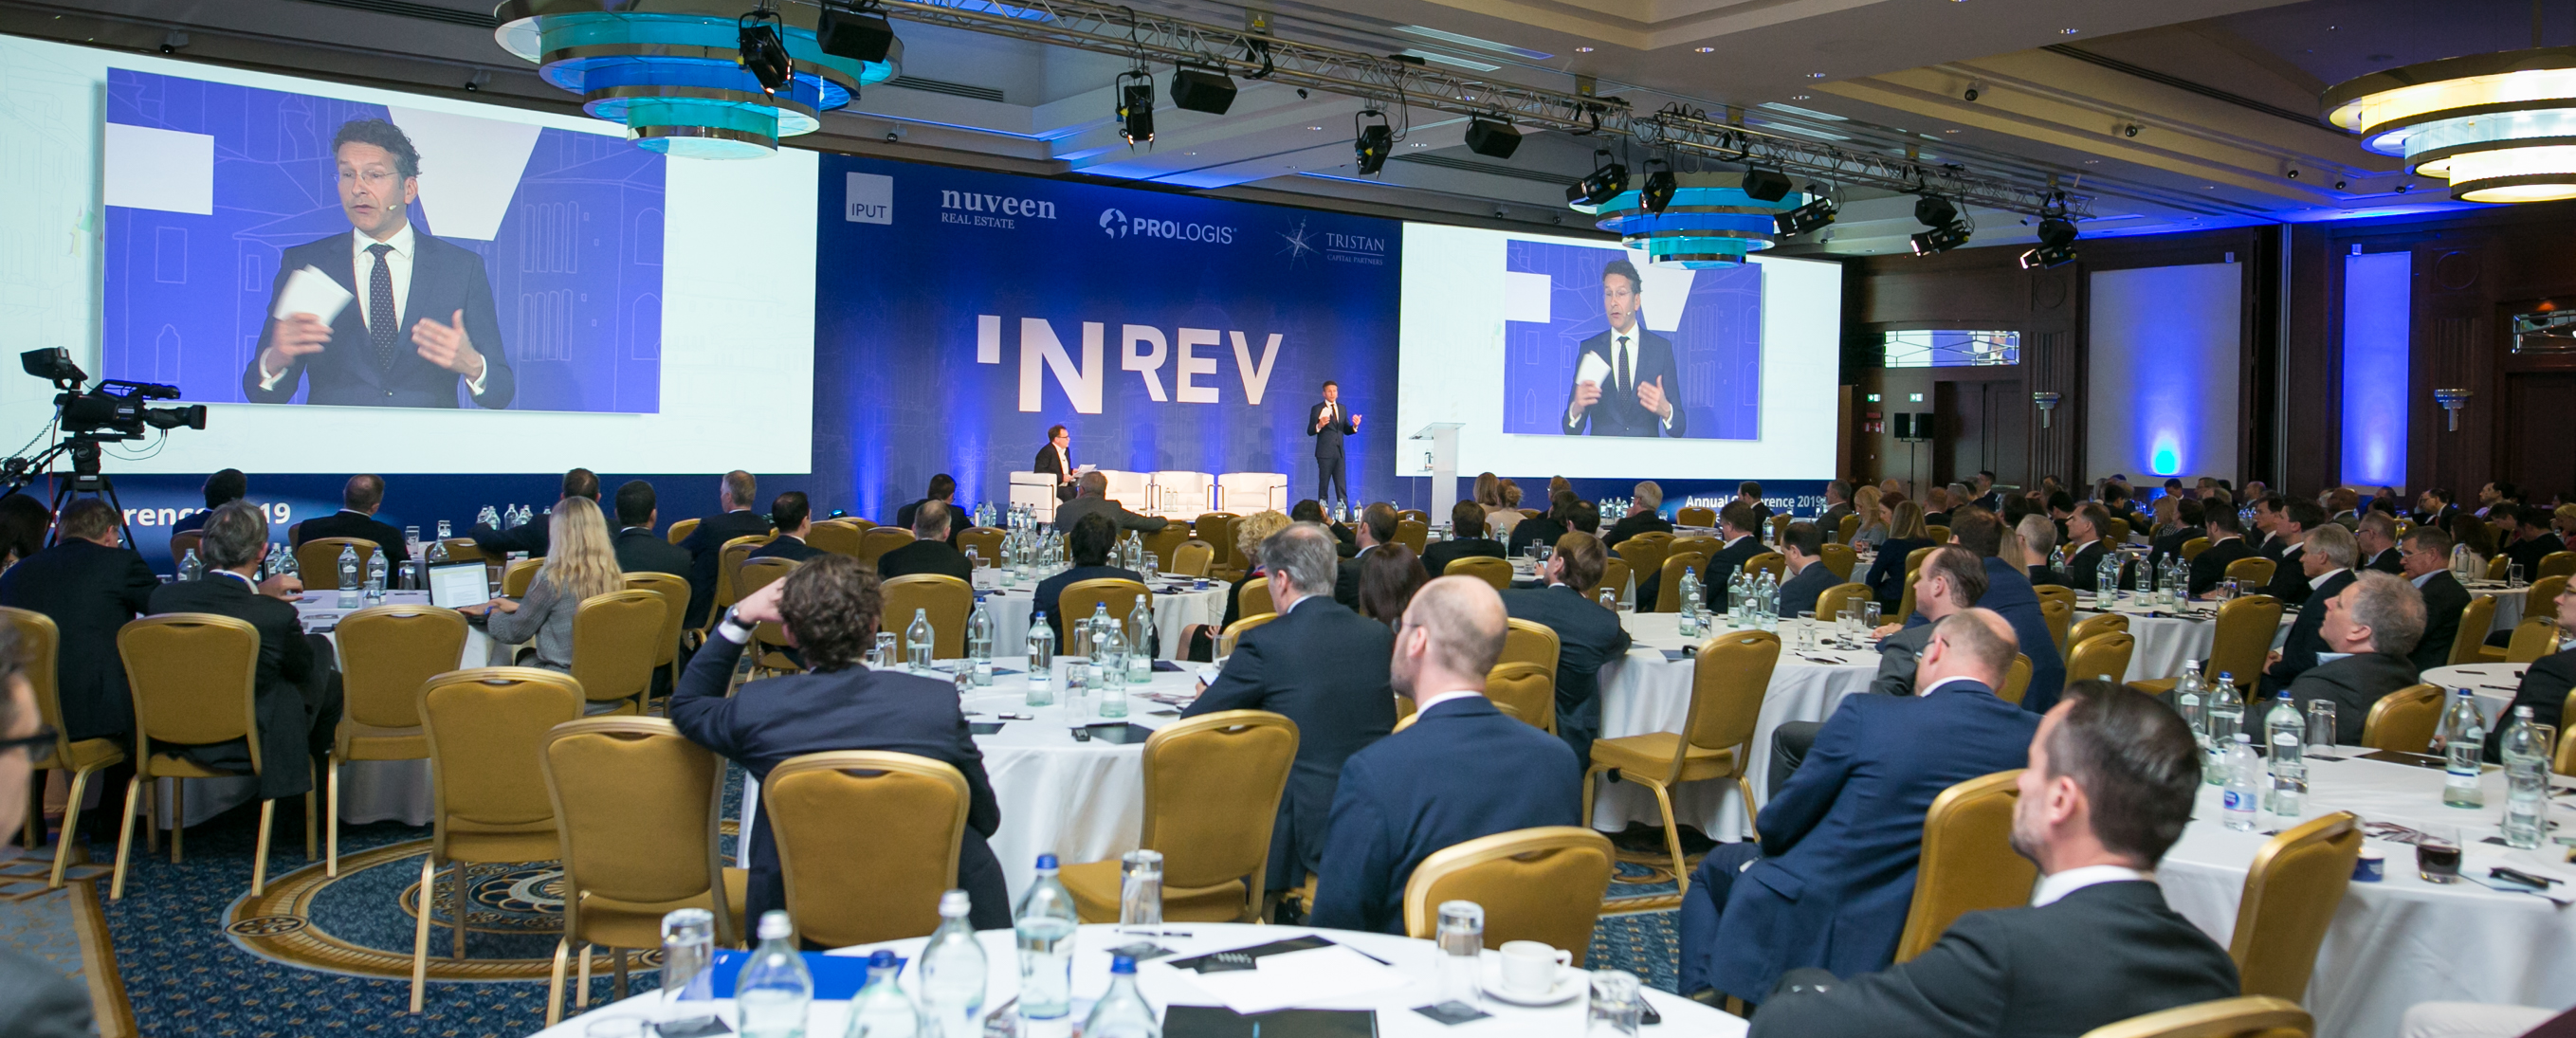 INREV Annual Conference 2019